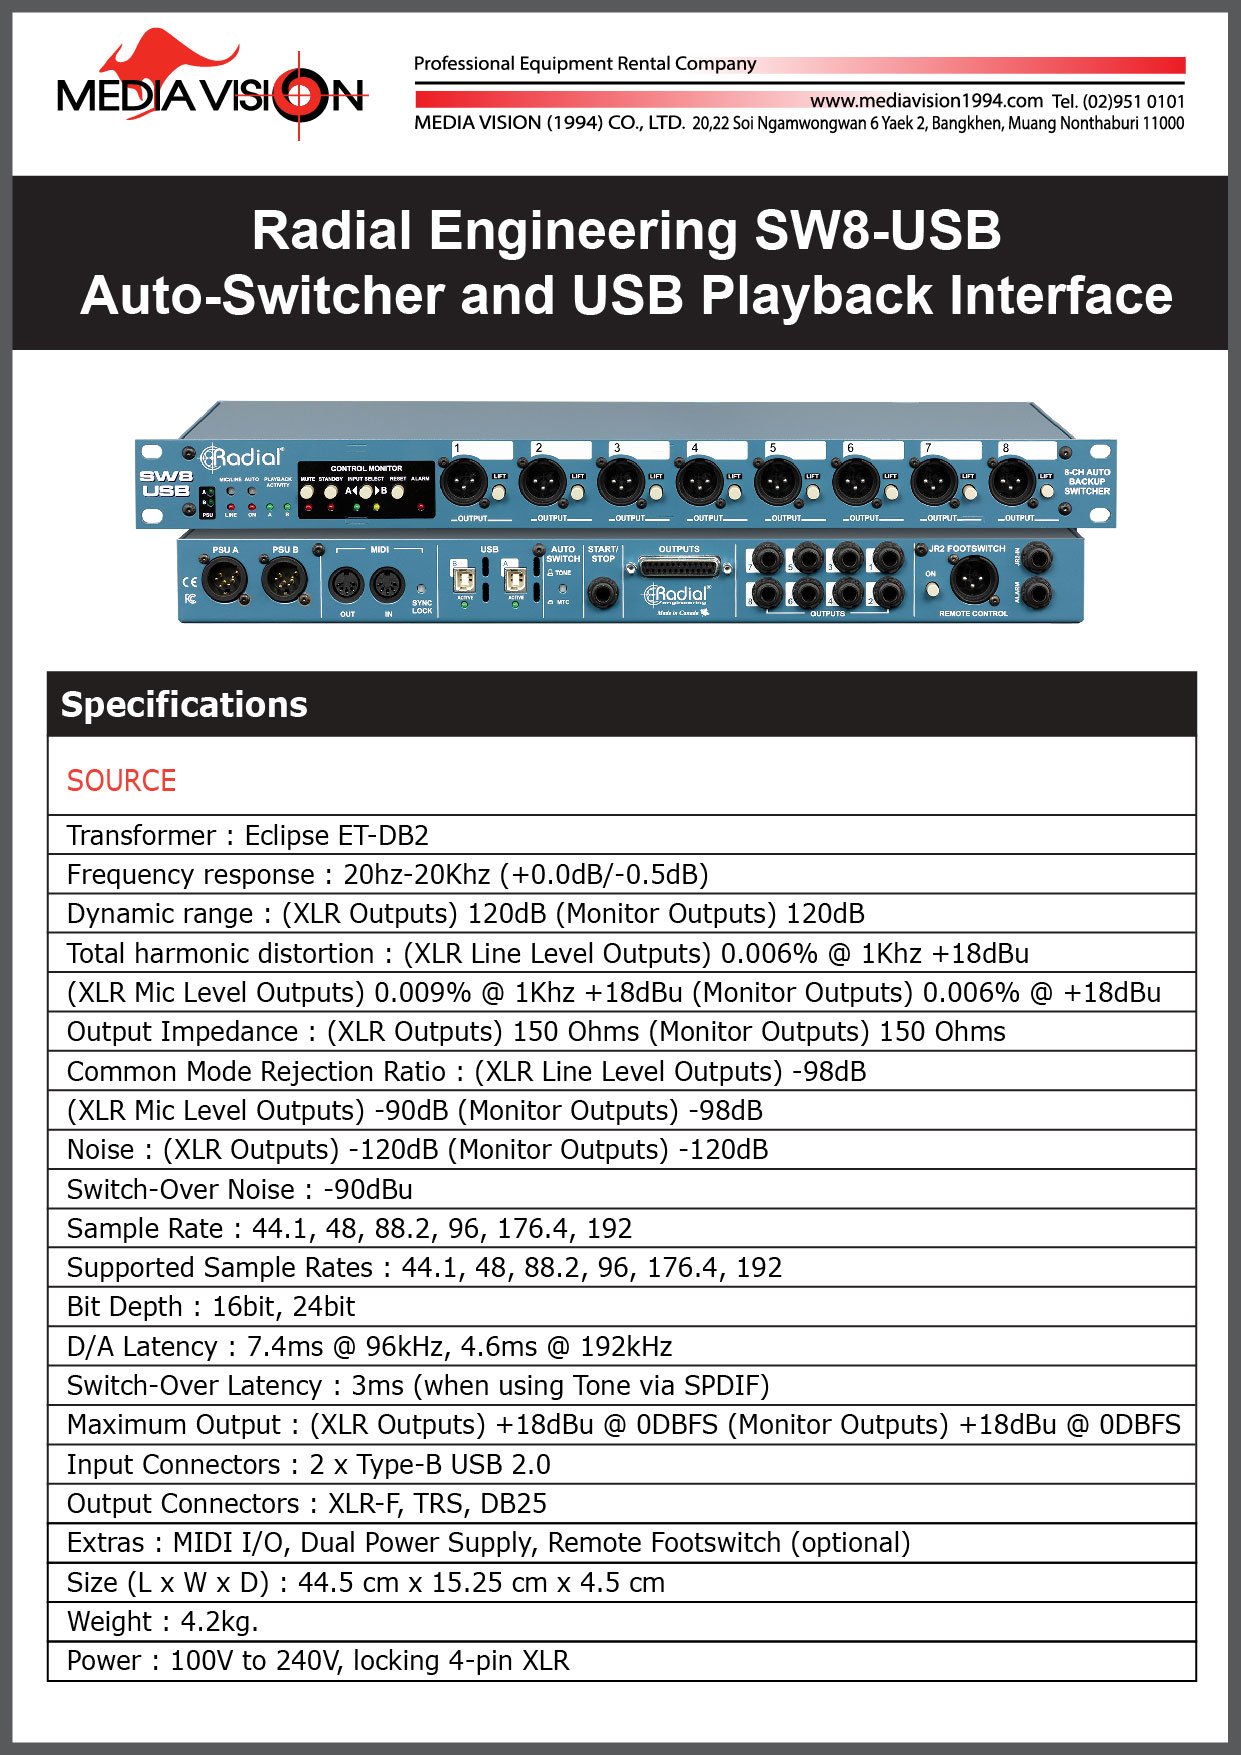 RADIAL ENGINEERING SW8-USB AUTO-SWITHCHER AND USB PLAYBACK INTERFACE